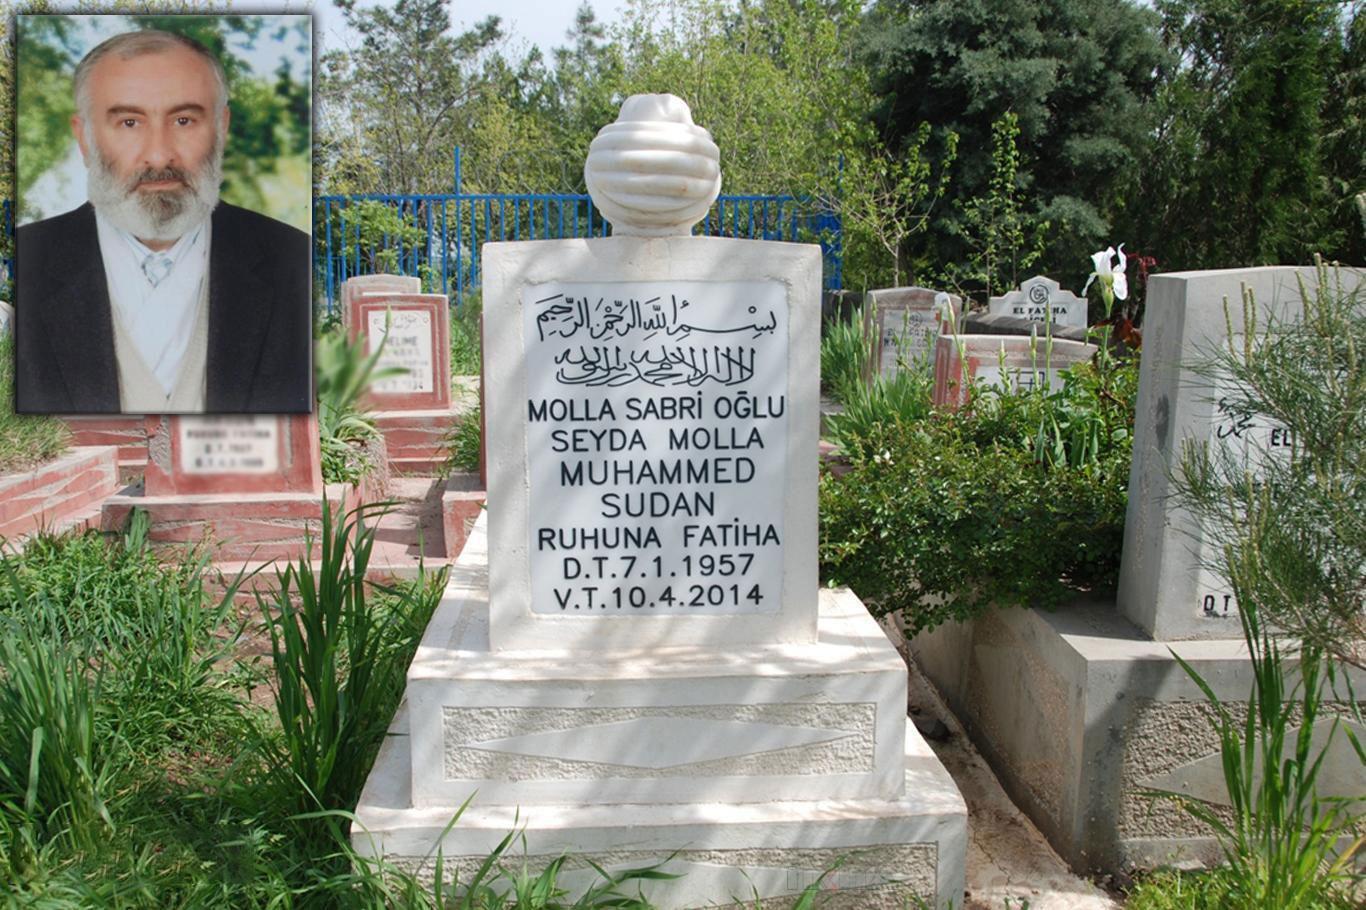 Islamic Scholar Mehmet Sudan commemorated with mercy on the 6th anniversary of his death